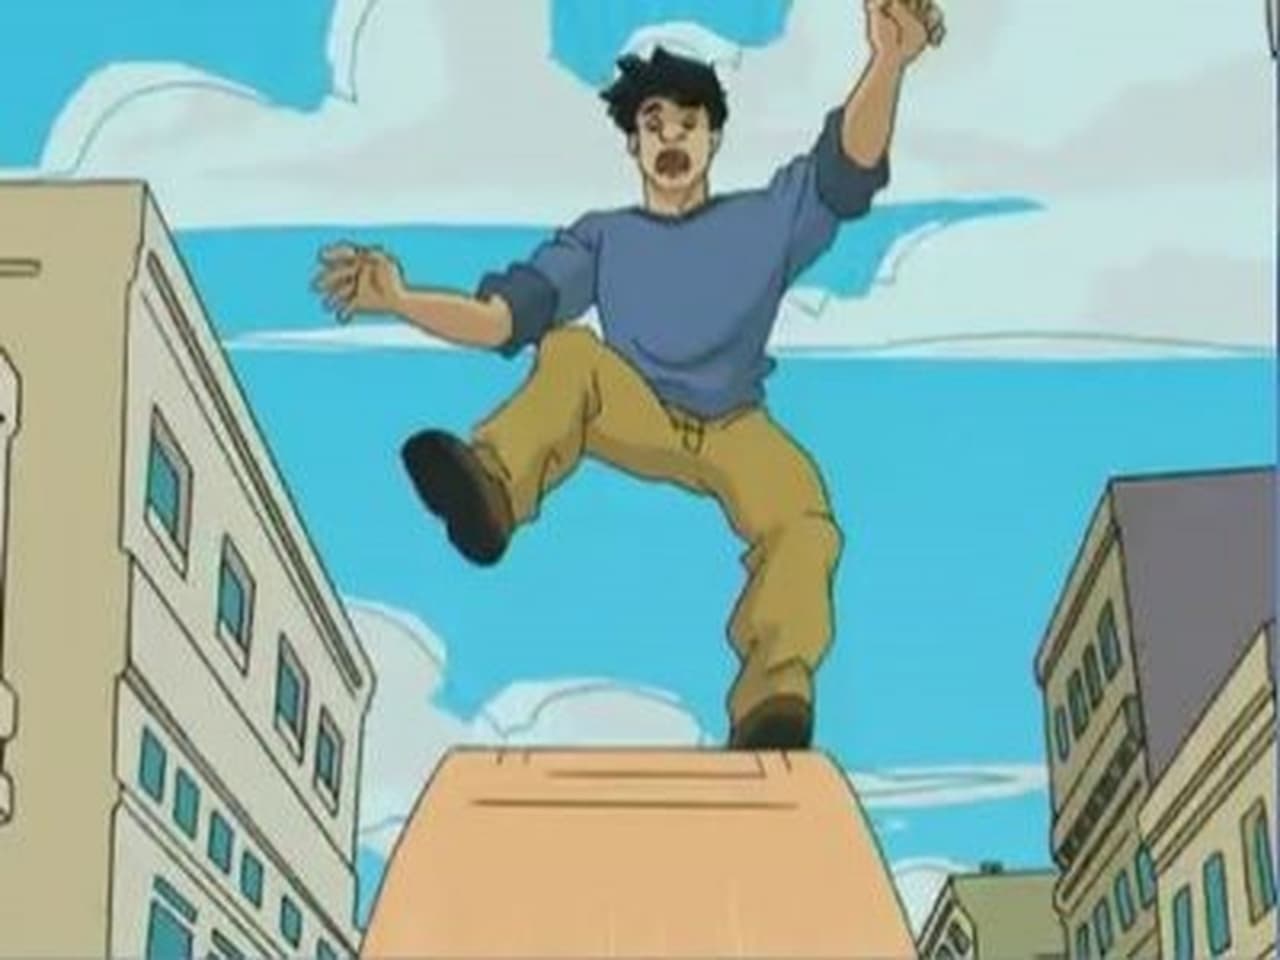 Jackie Chan Adventures - Season 2 Episode 24 : The King and Jade